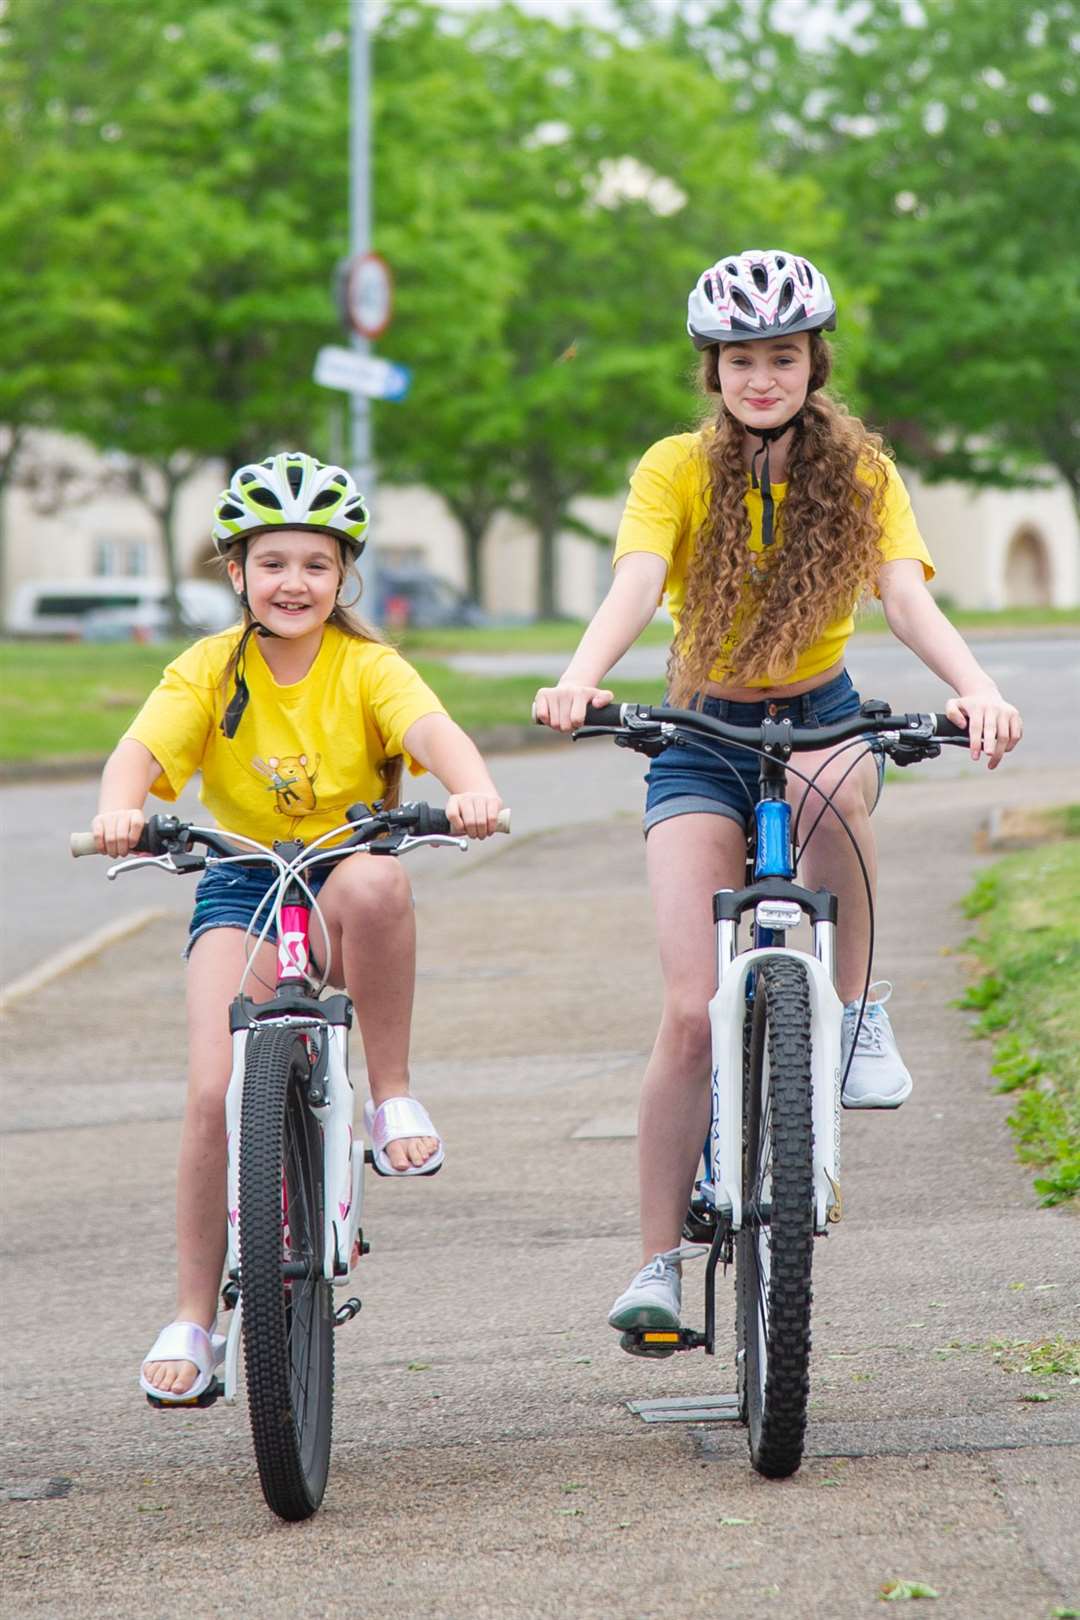 Emma (left) and Lucy Stewart (right) will cycle 26 miles in six hours to raise money for Royal Aberdeen Children's Hospital and Dr Gray's Hospital children's ward. Picture: Daniel Forsyth.